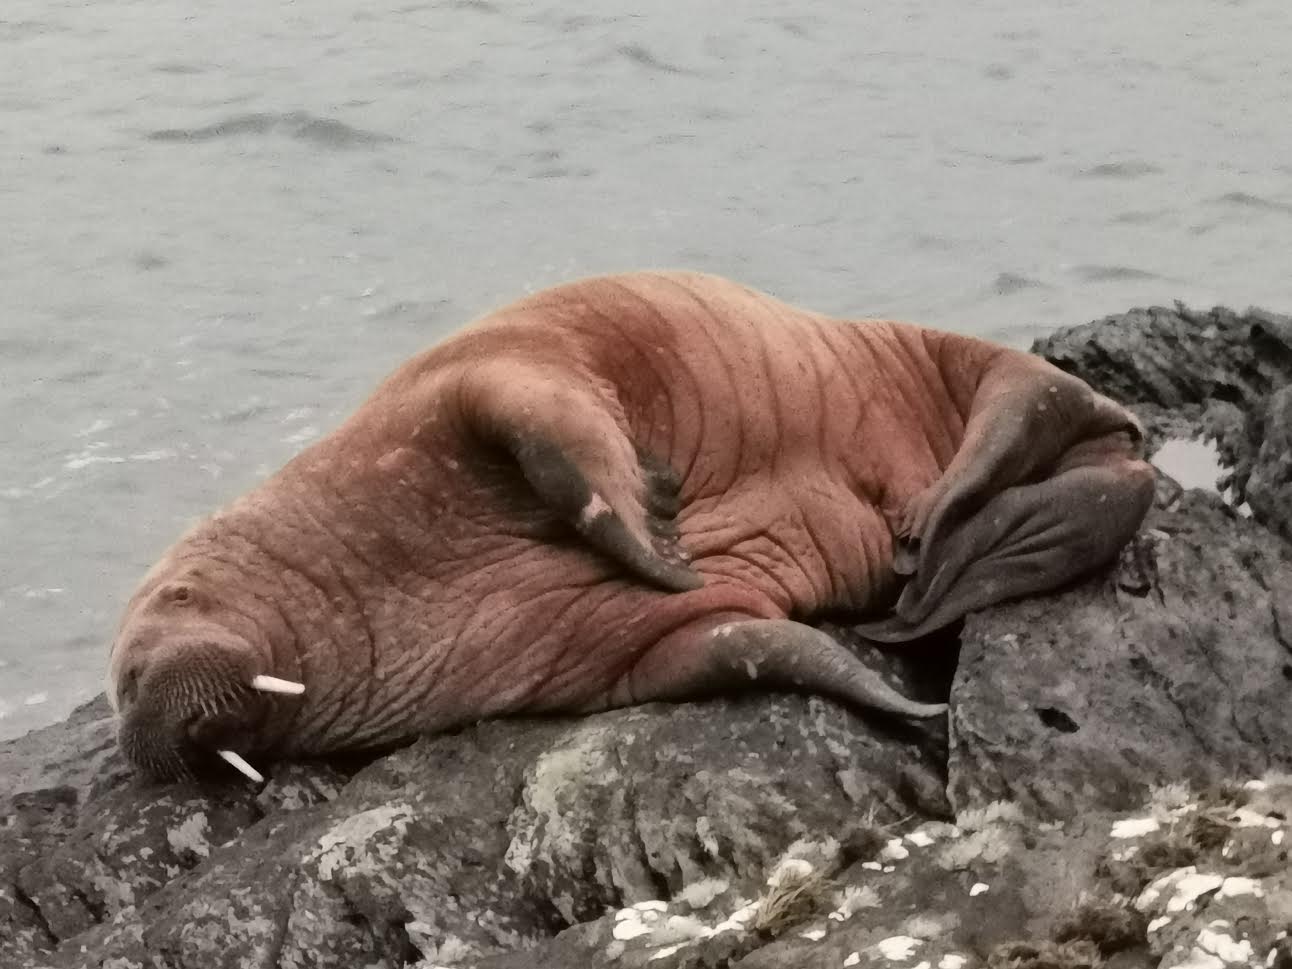 The Arctic walrus travels thousands of miles to Ireland after probably falling asleep on the iceberg